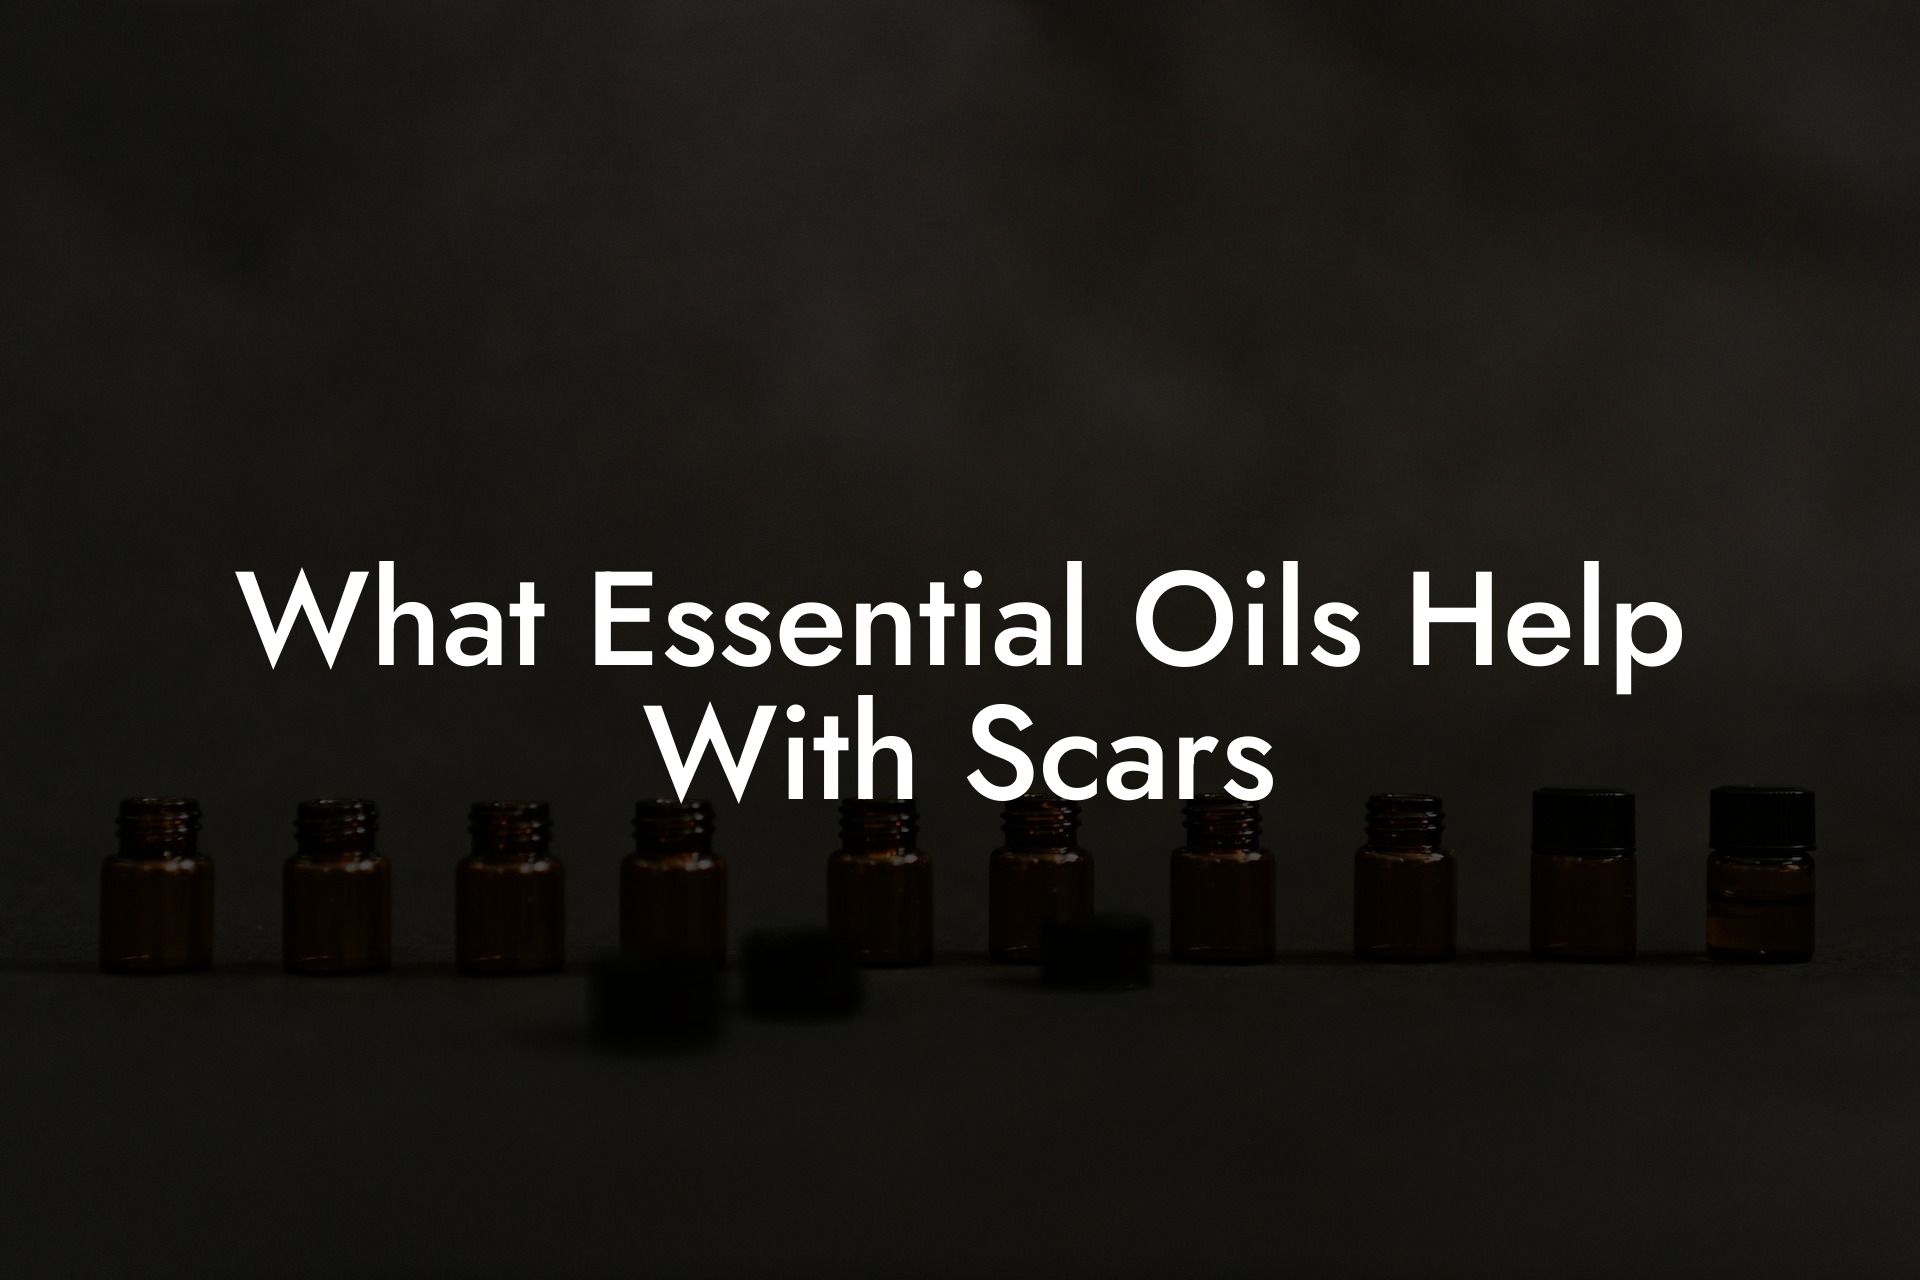 What Essential Oils Help With Scars